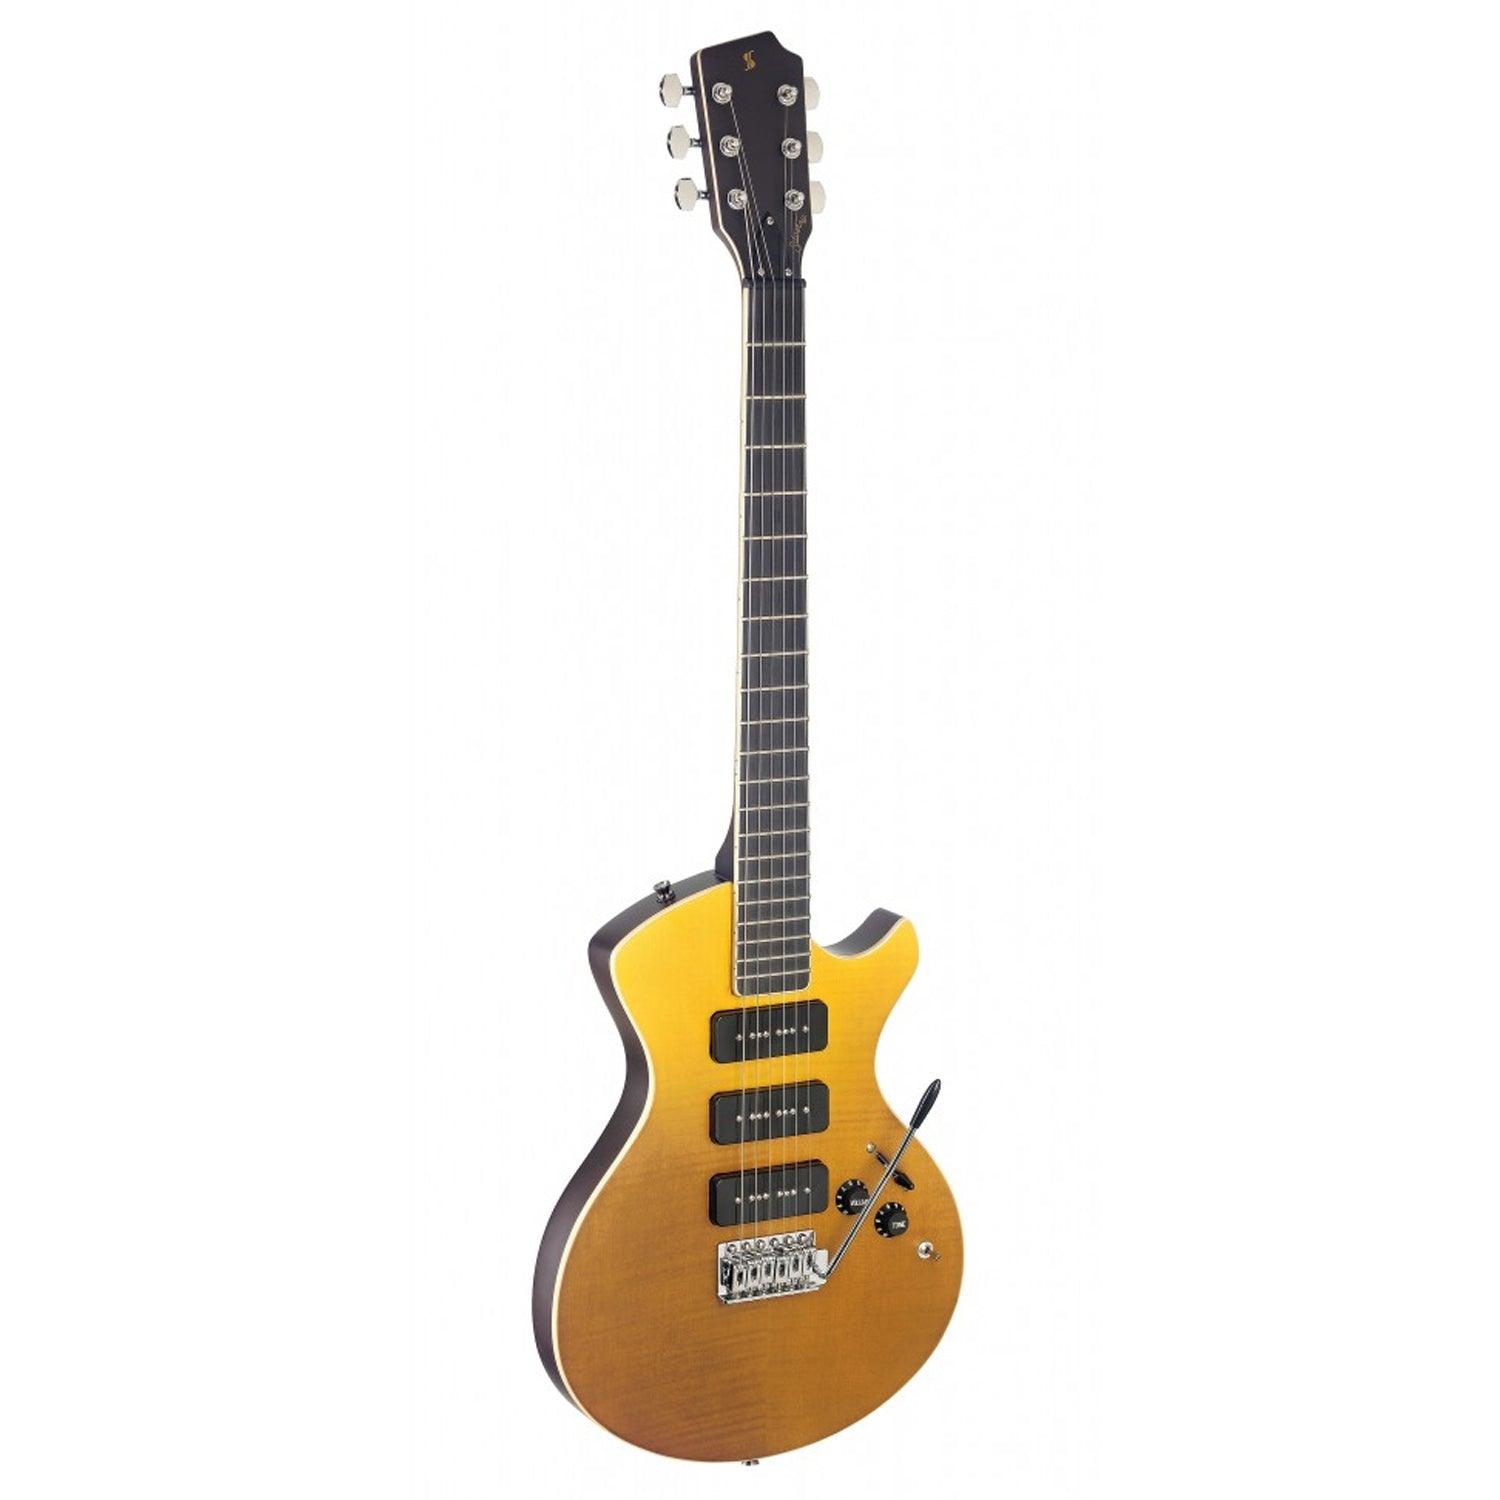 Stagg SVY NASHDLX FSB Silveray series Nash Deluxe model Electric Guitar with solid alder body - DY Pro Audio